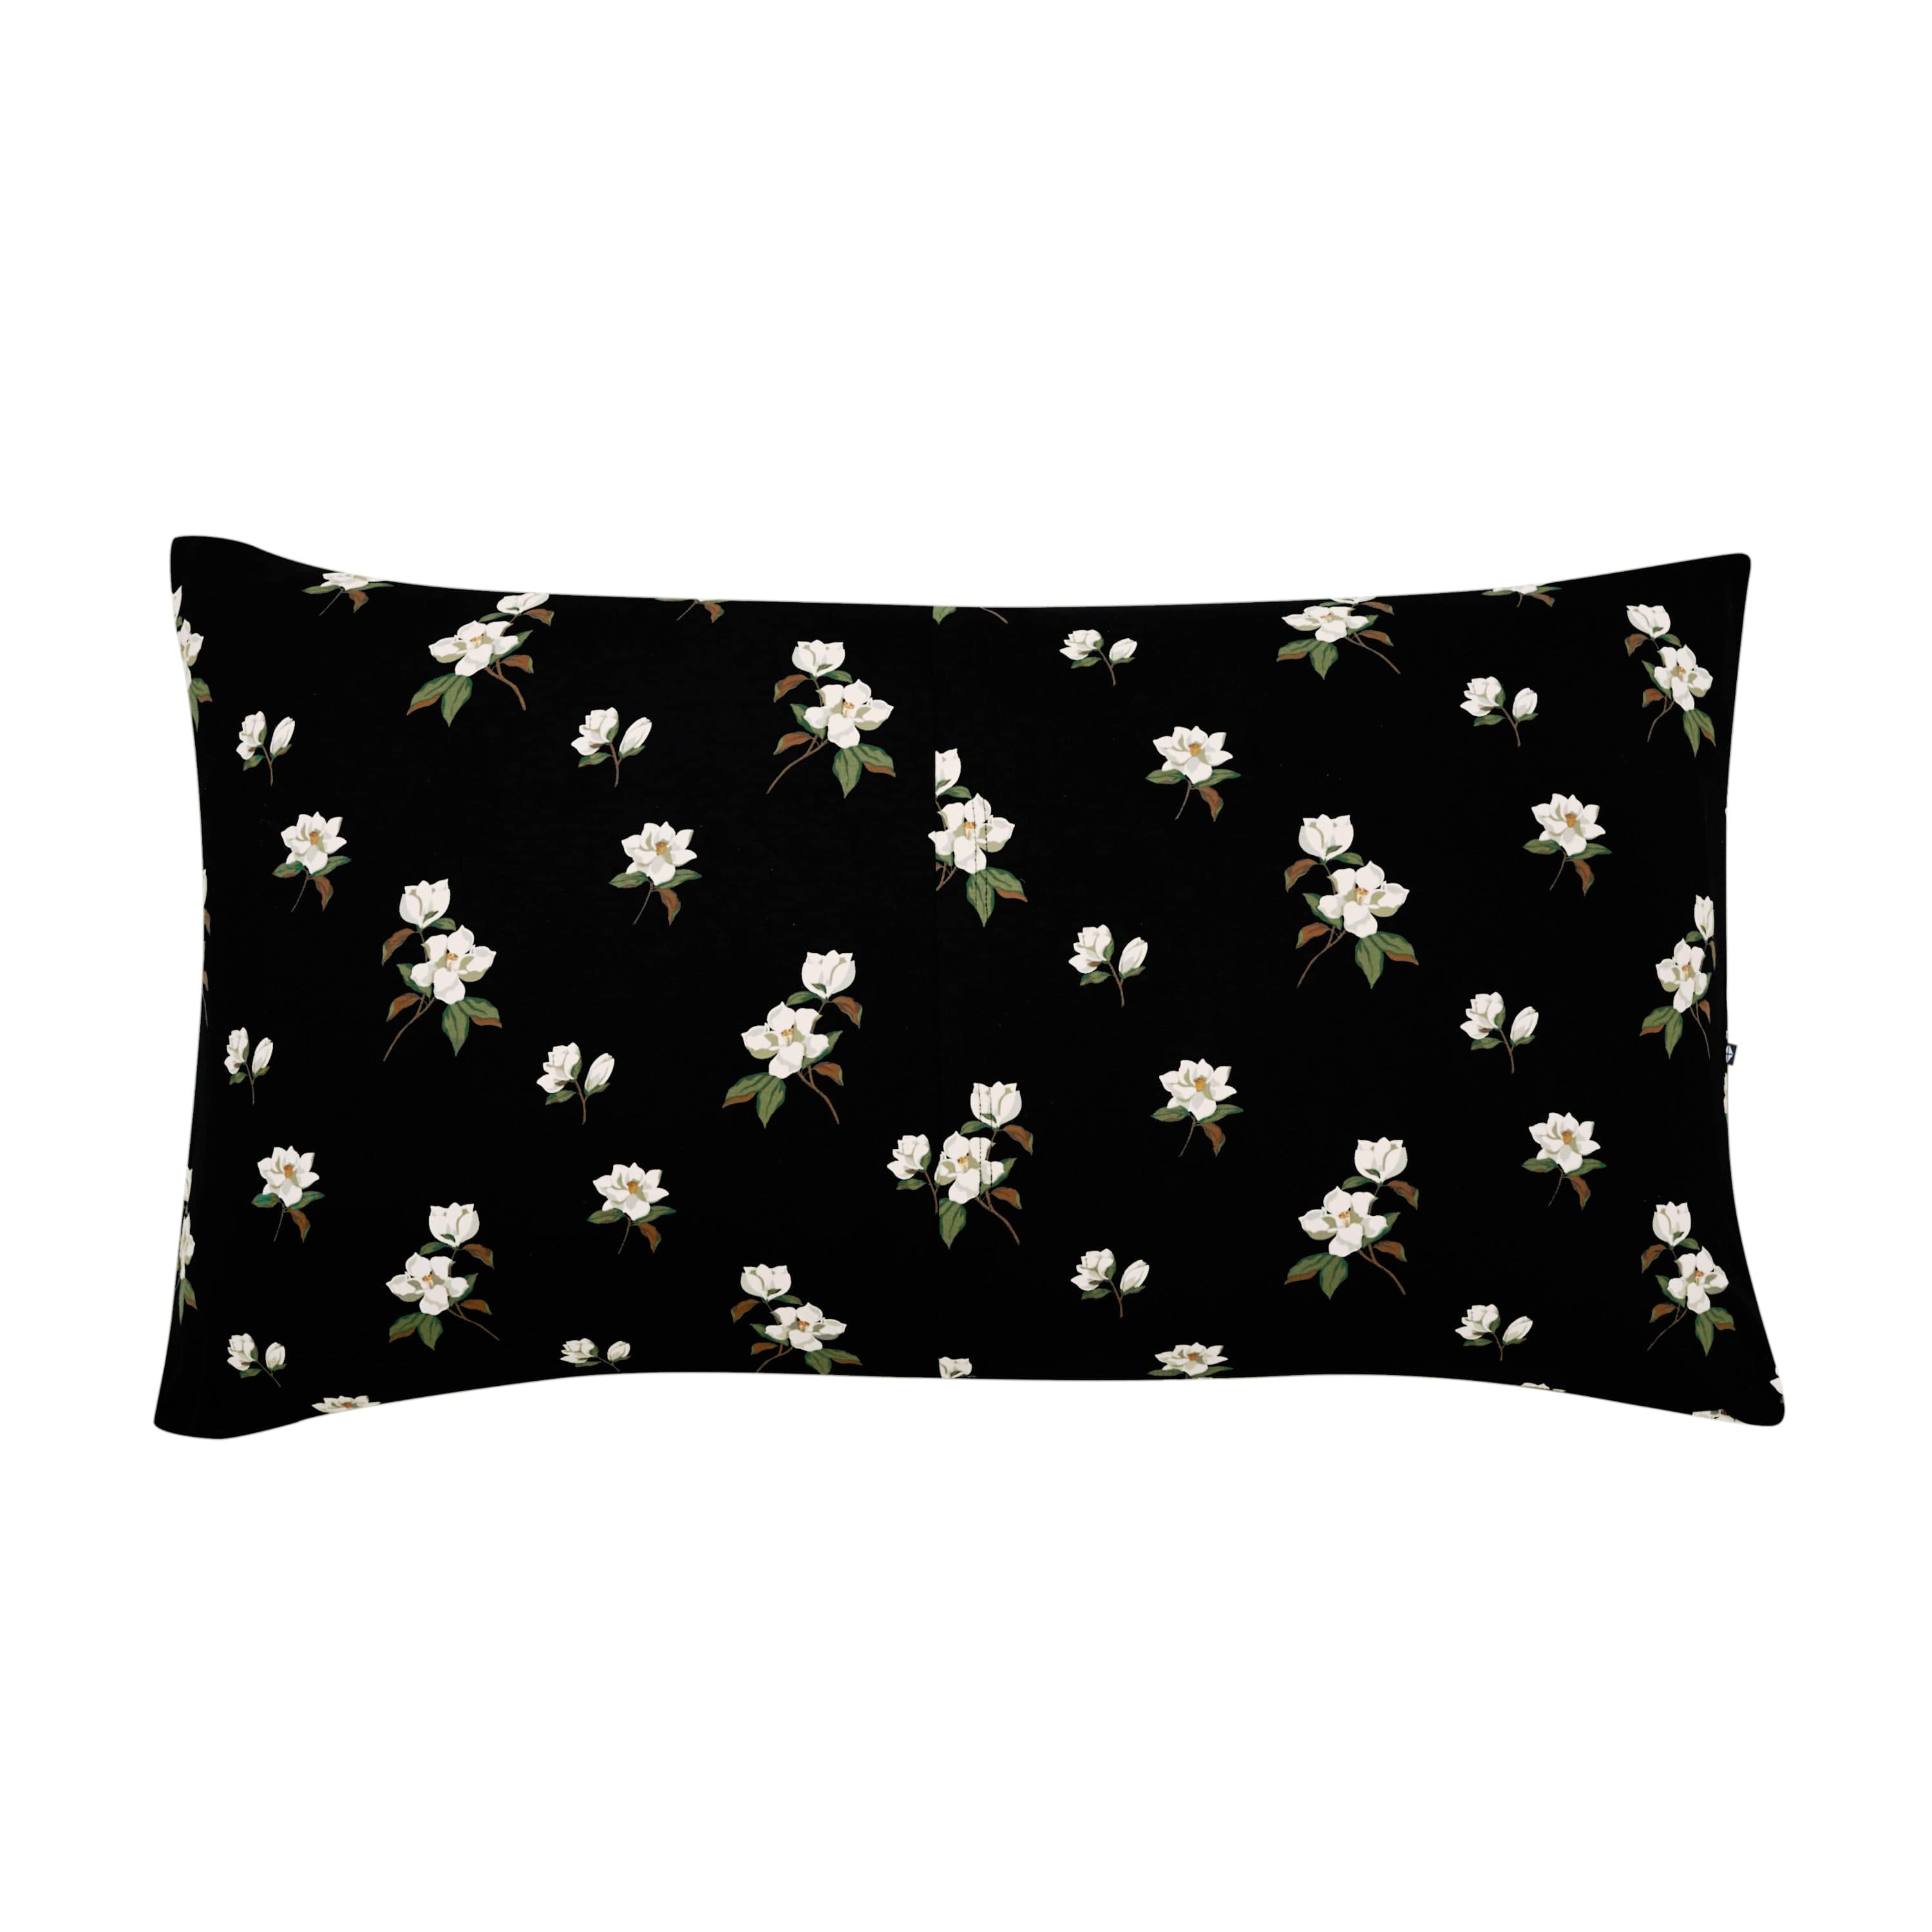 Kyte Baby King Pillow Case Big Midnight Magnolia / King King Pillowcase in Big Midnight Magnolia